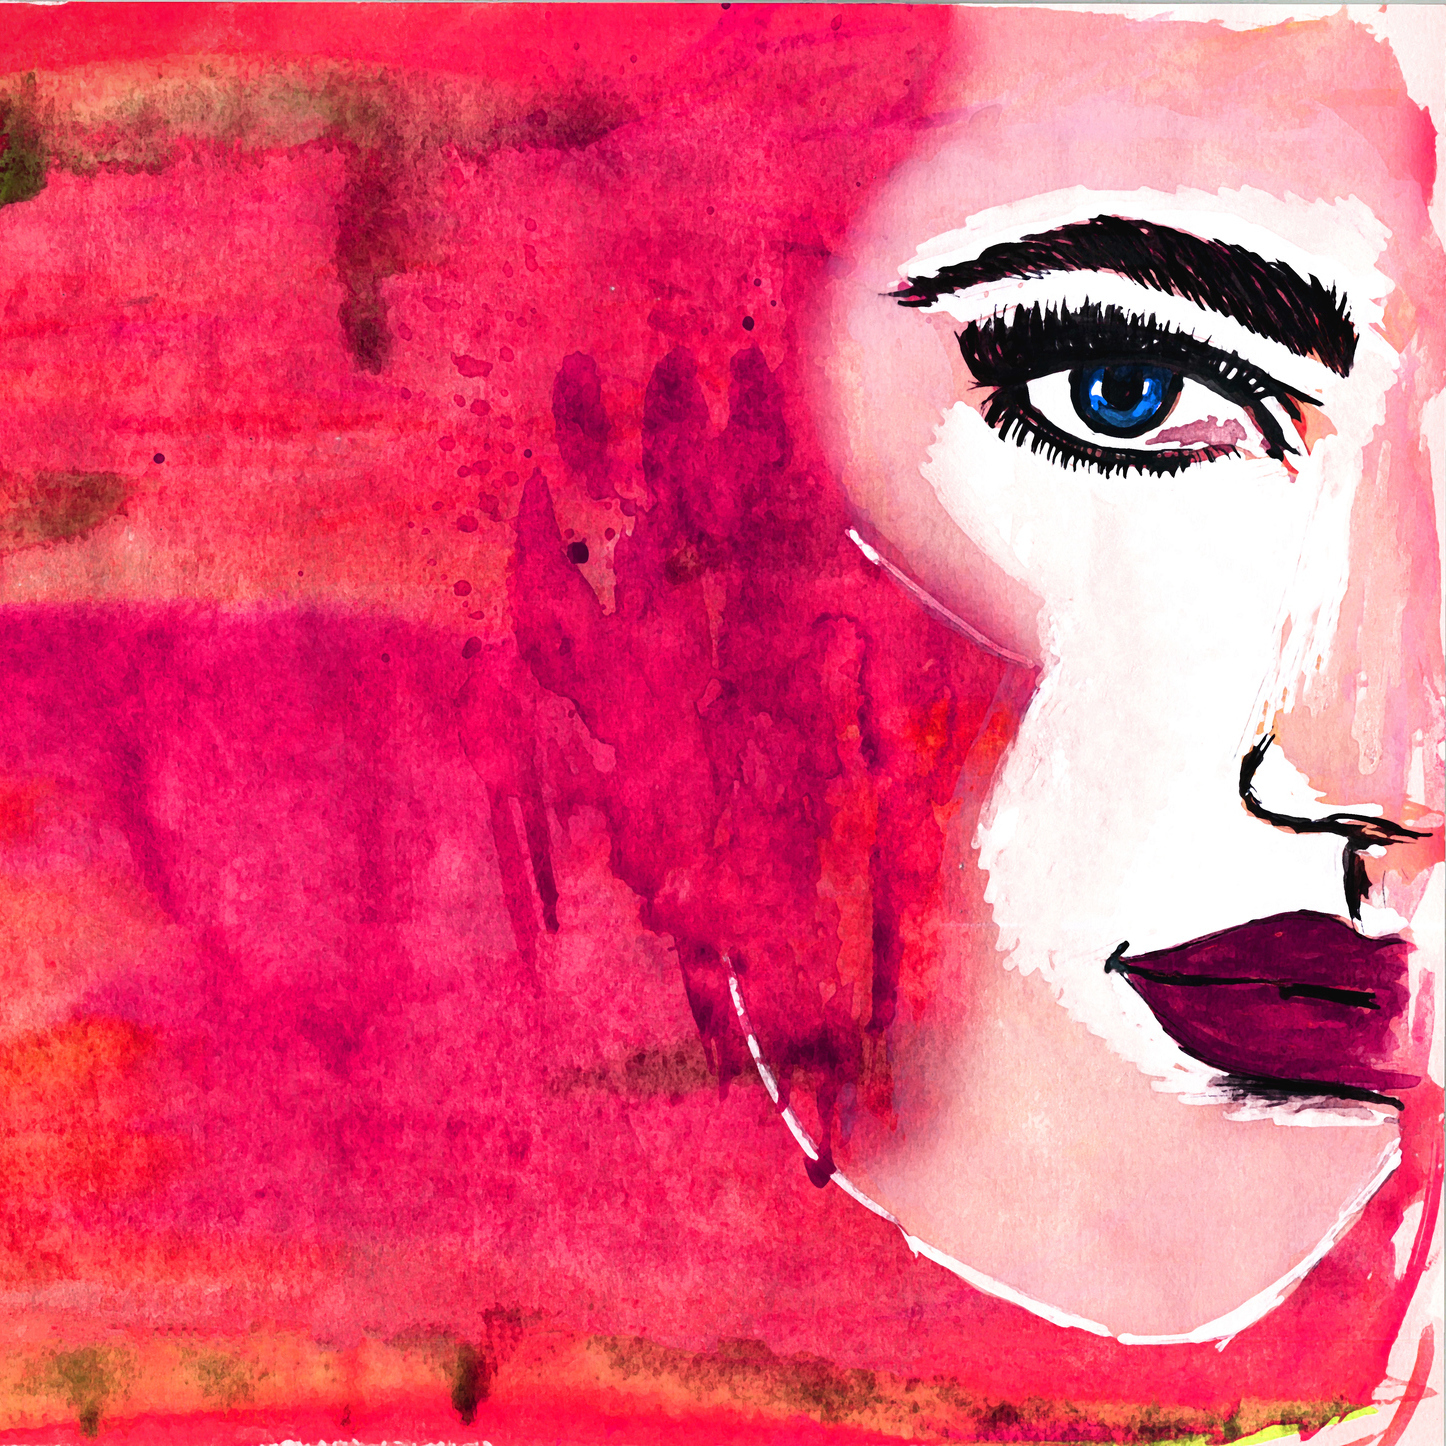 watercolor painting of a woman's face